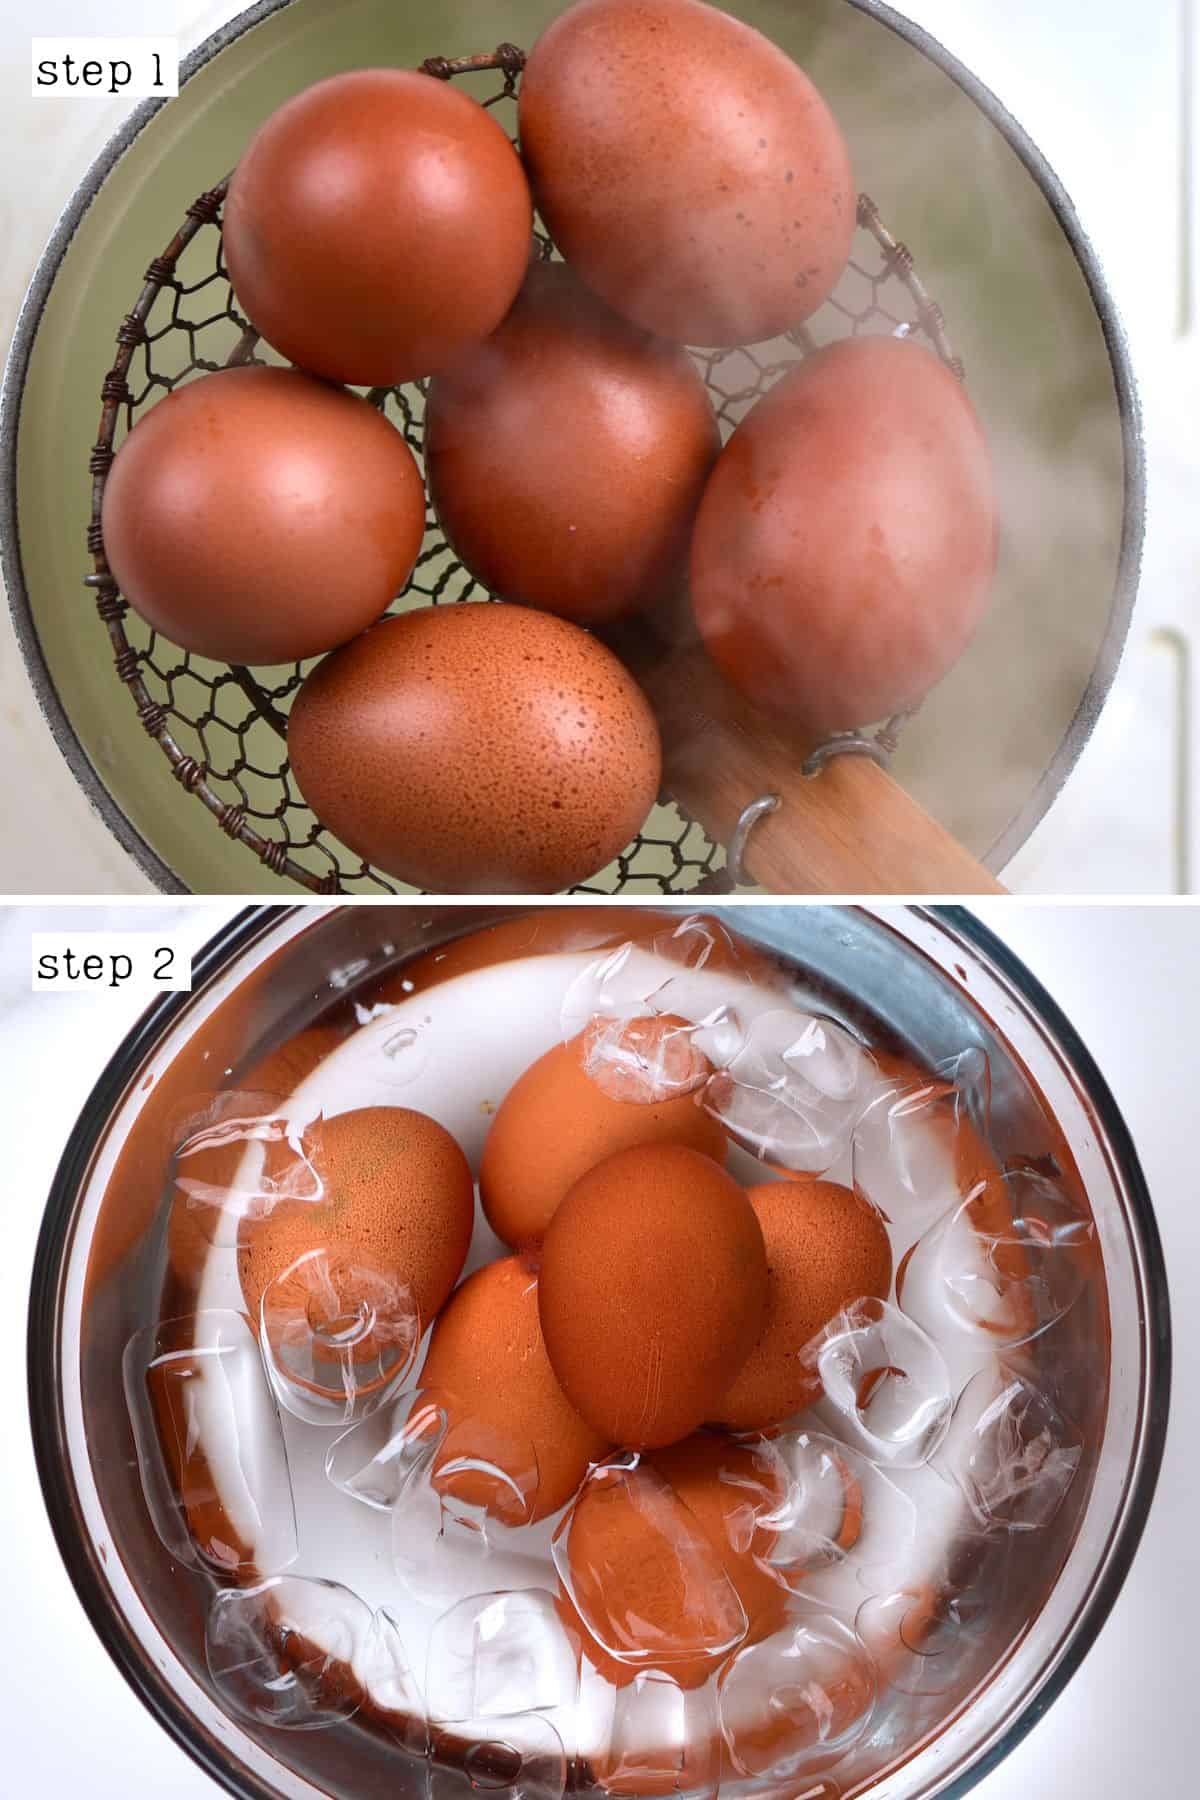 Steps for cooking and cooling eggs